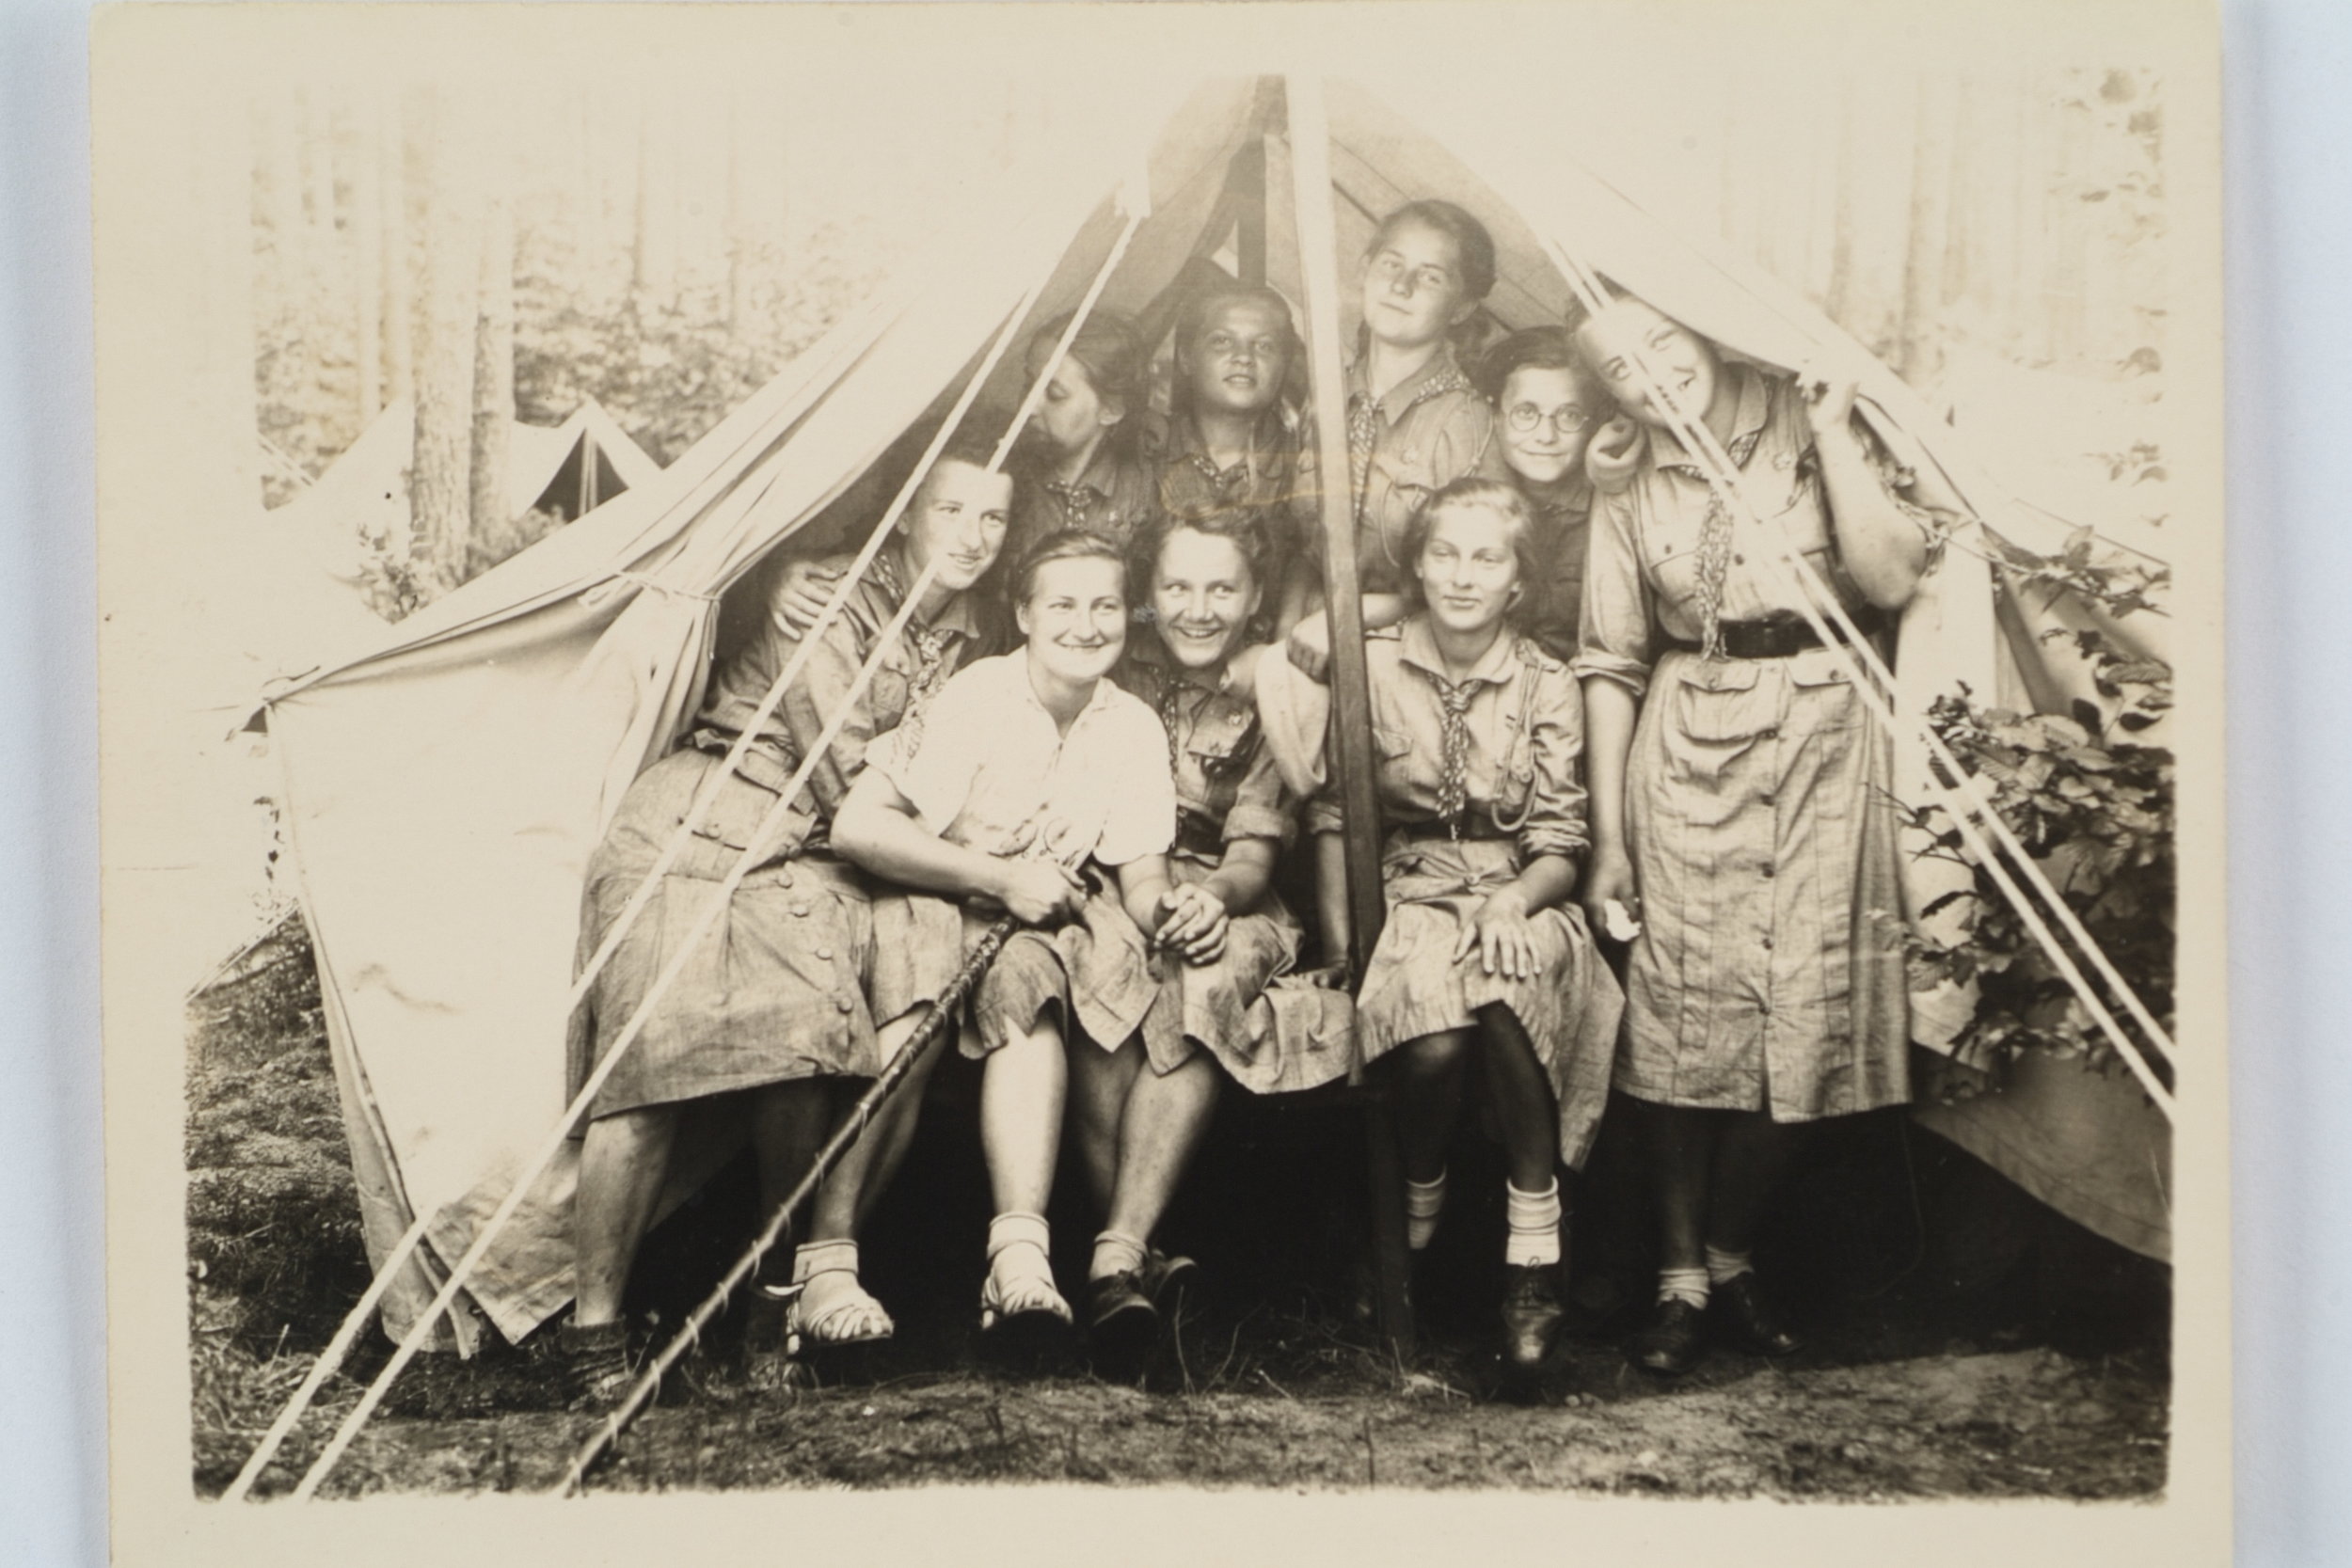 Wanda Poltawska with her Girl Scout Troop